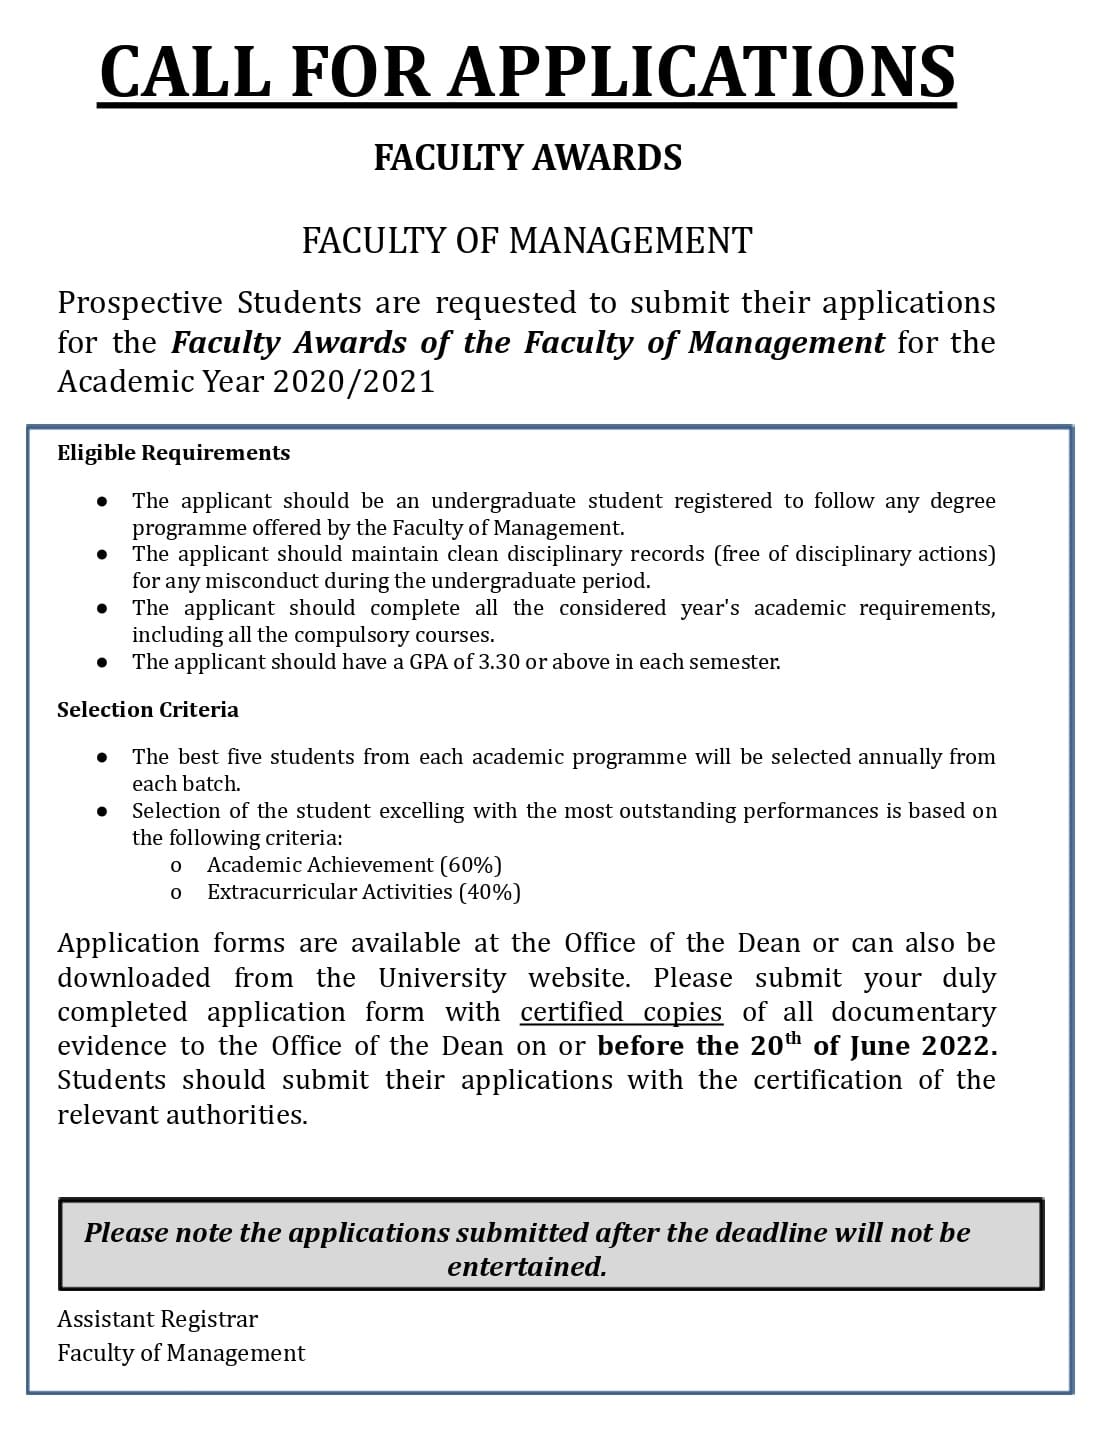 Call for applications  Faculty Awandrs FOM Notice .docx_page-0001 (1)